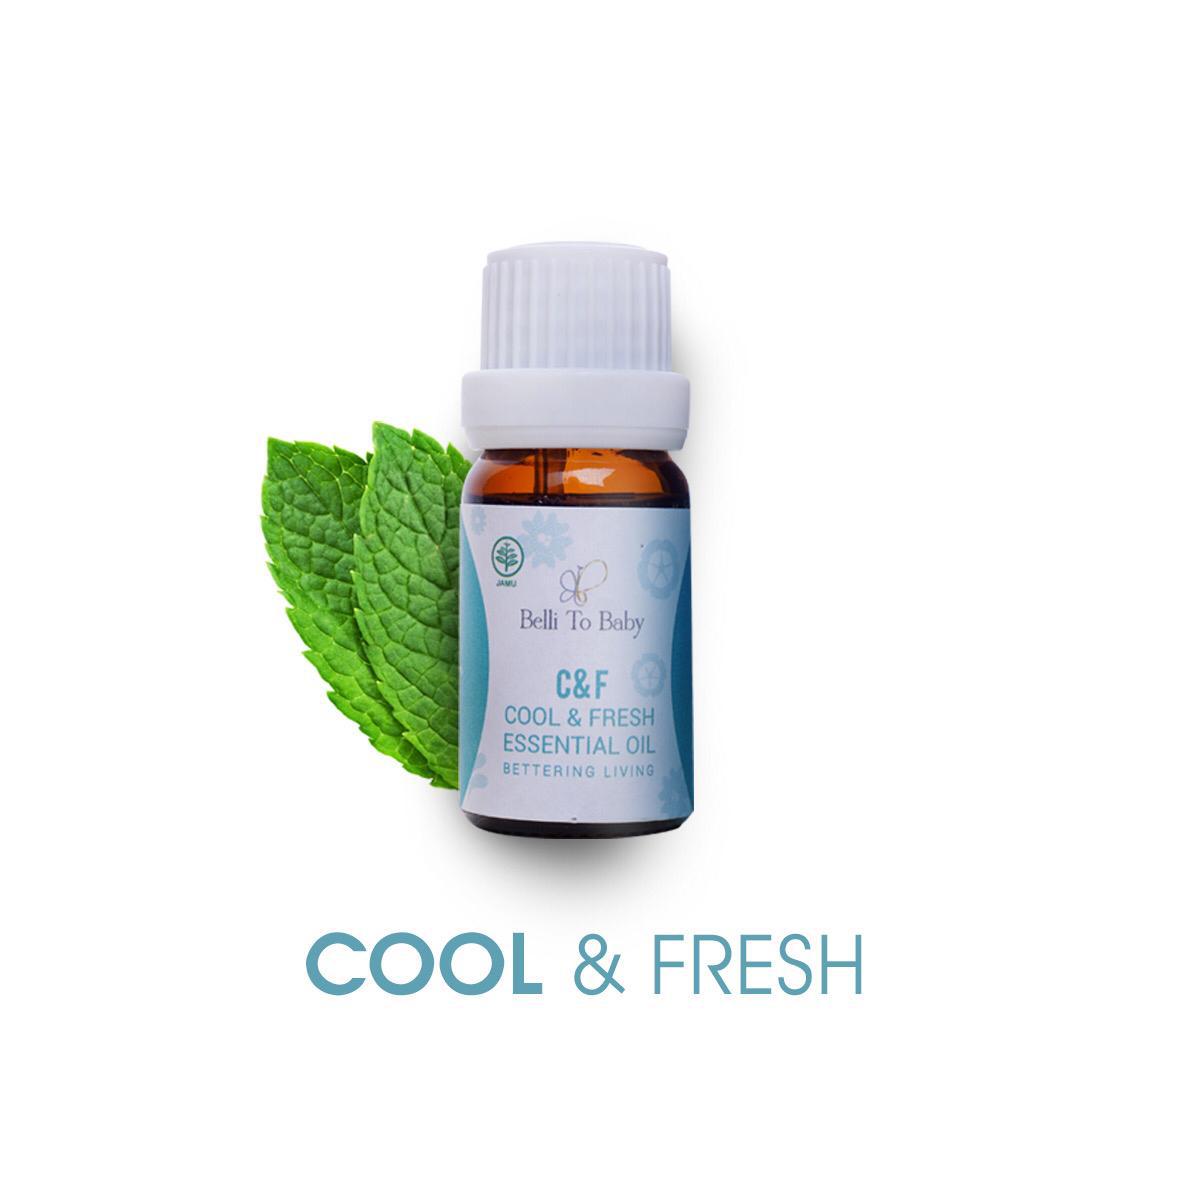 Belli To Baby Belli To Baby Essential Oil Cool & Fresh